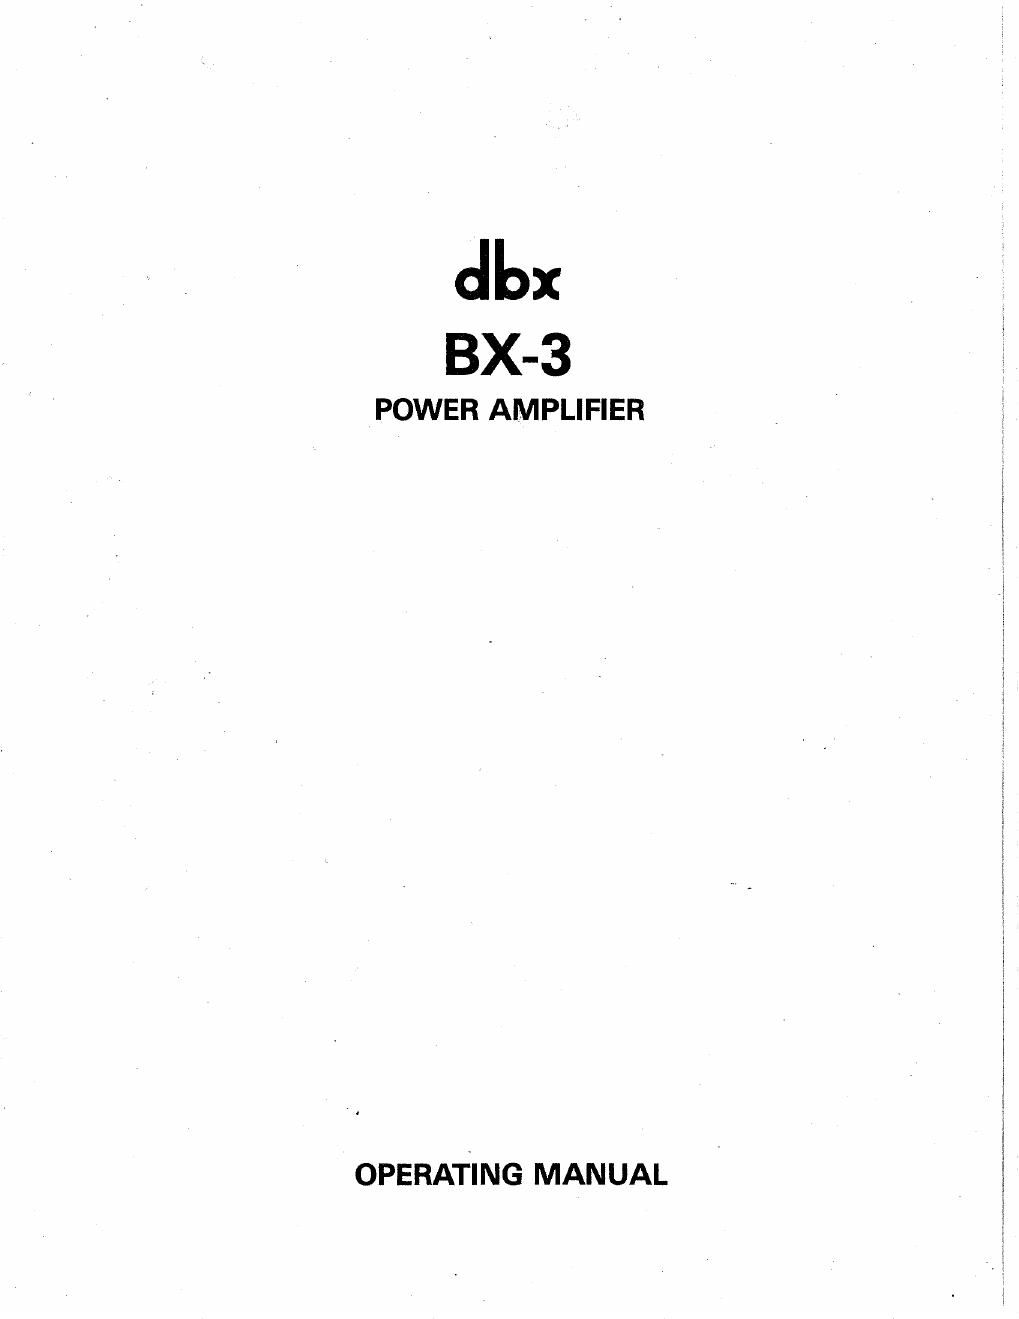 dbx bx 3 owners manual